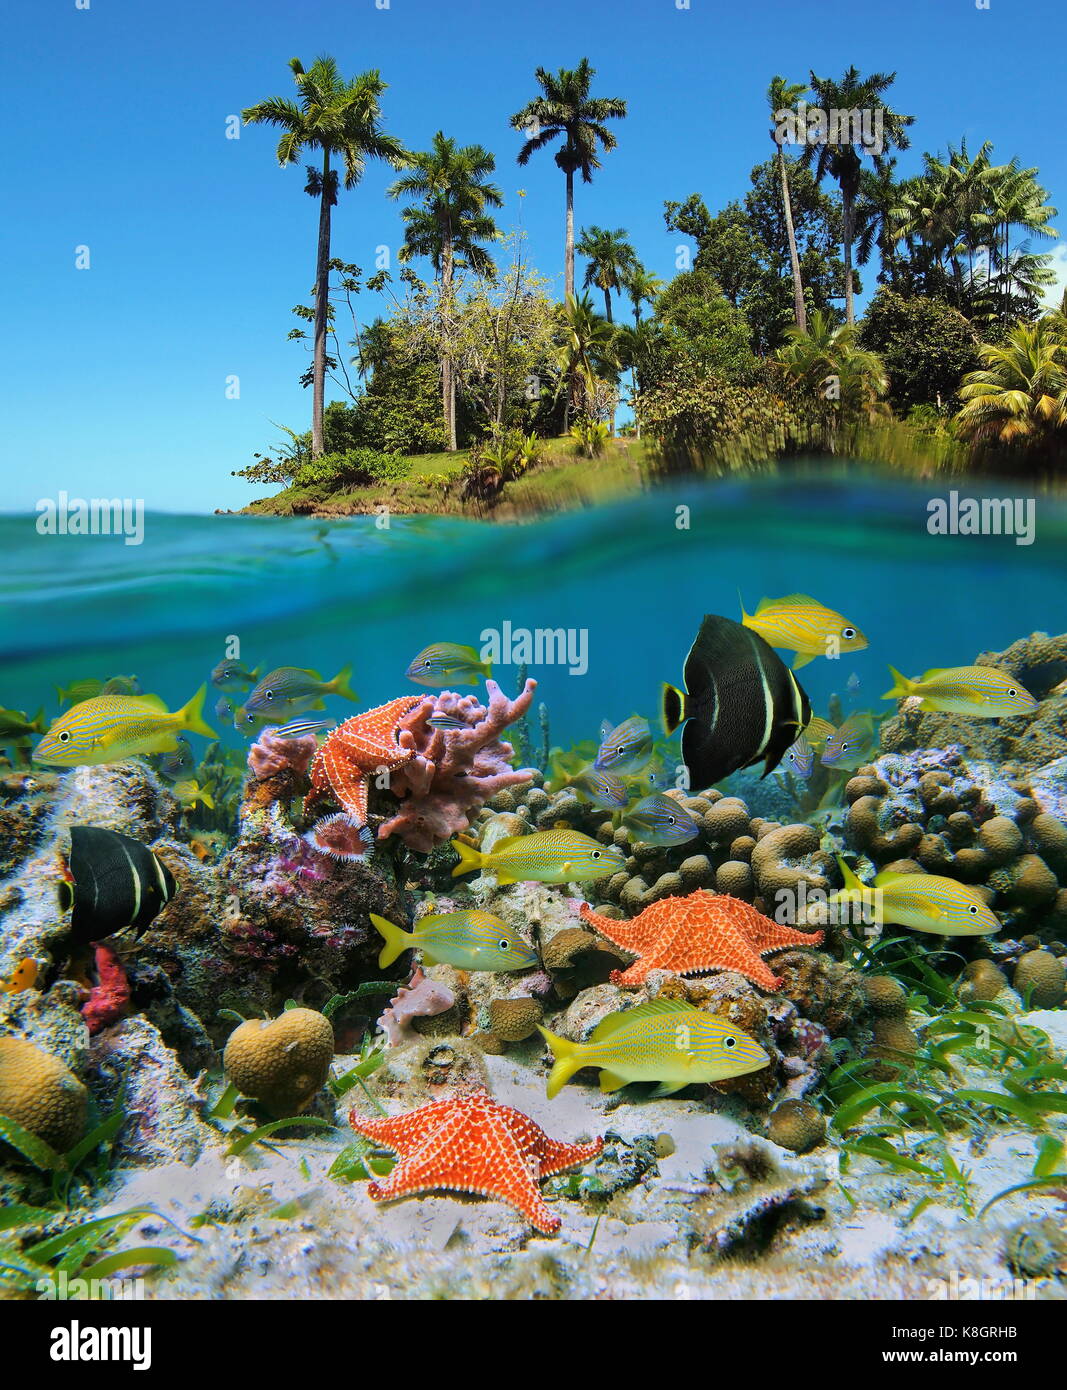 Split view in the tropics with colorful fish and starfish in a coral reef underwater and lush tropical island above water surface, Caribbean sea Stock Photo